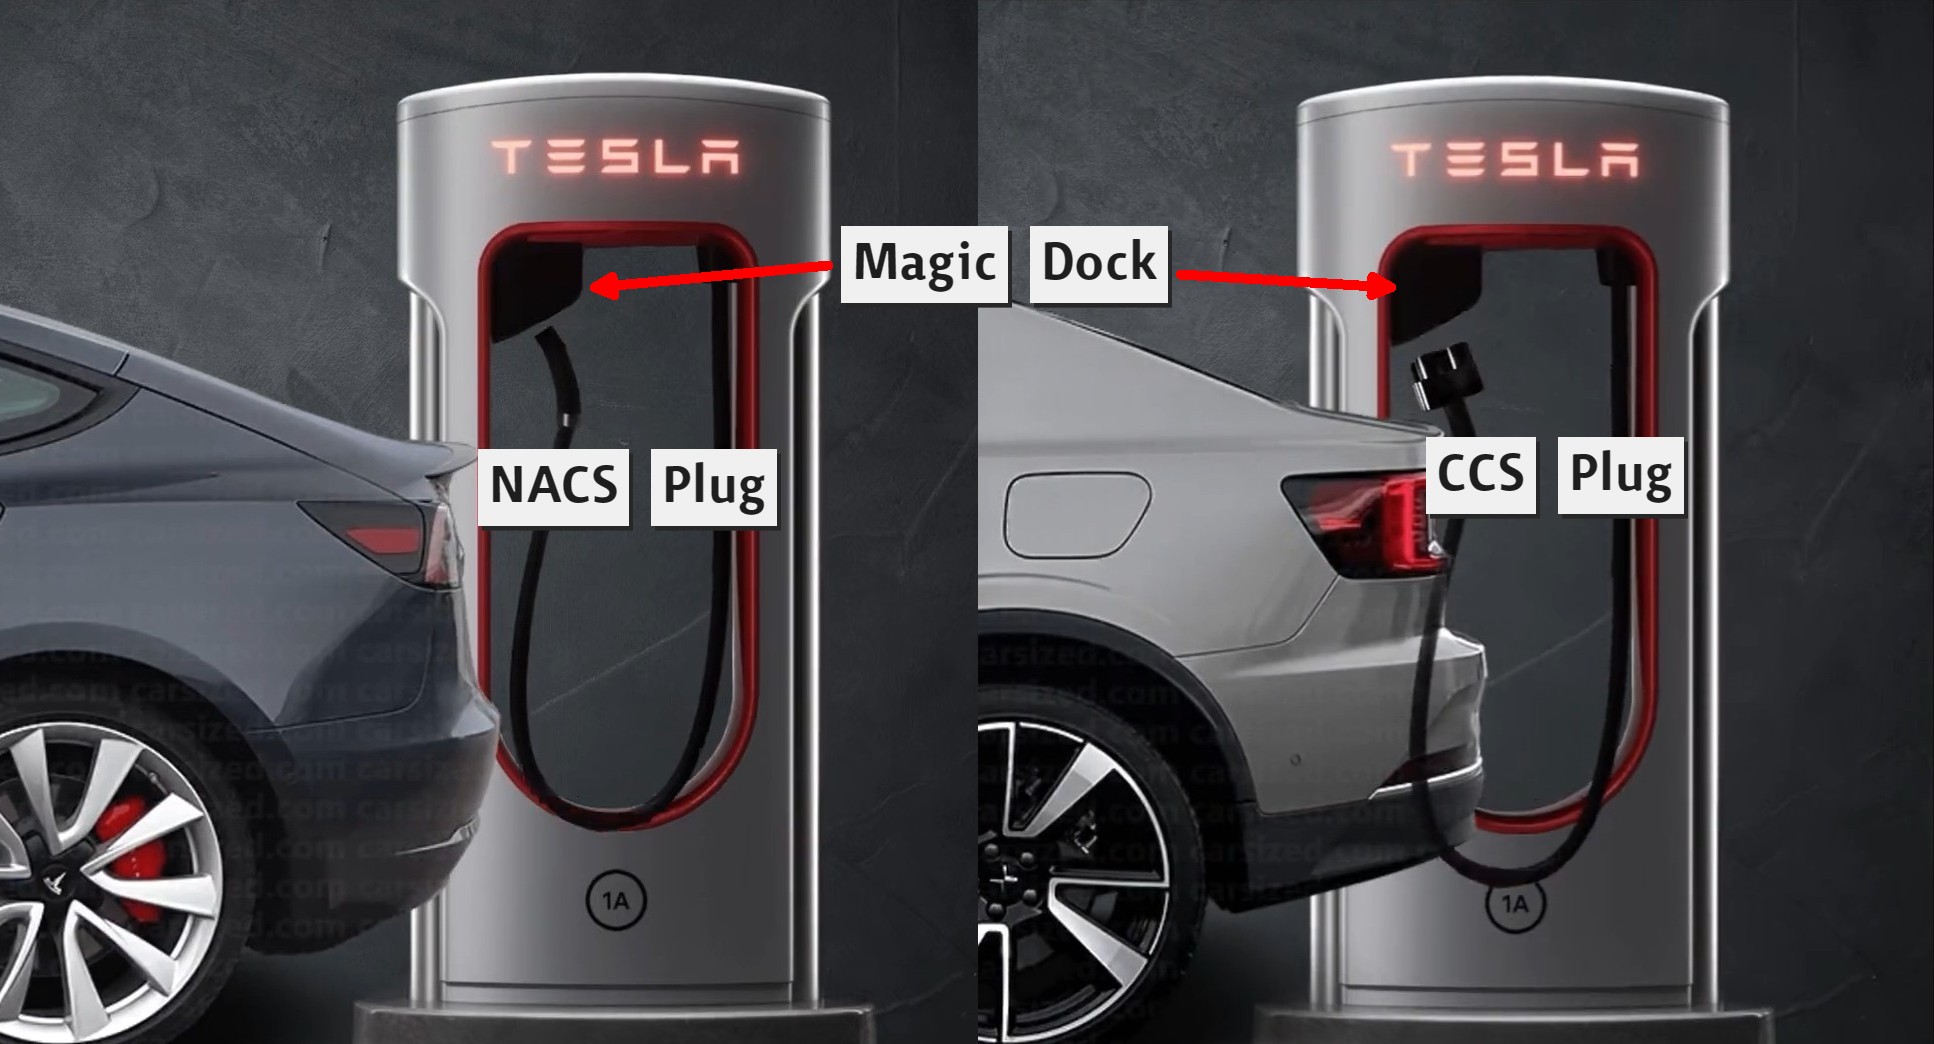 Tesla CCS magic dock now available in WA state  MachEforum - Ford Mustang  Mach-E News, Owners, Discussions, Community